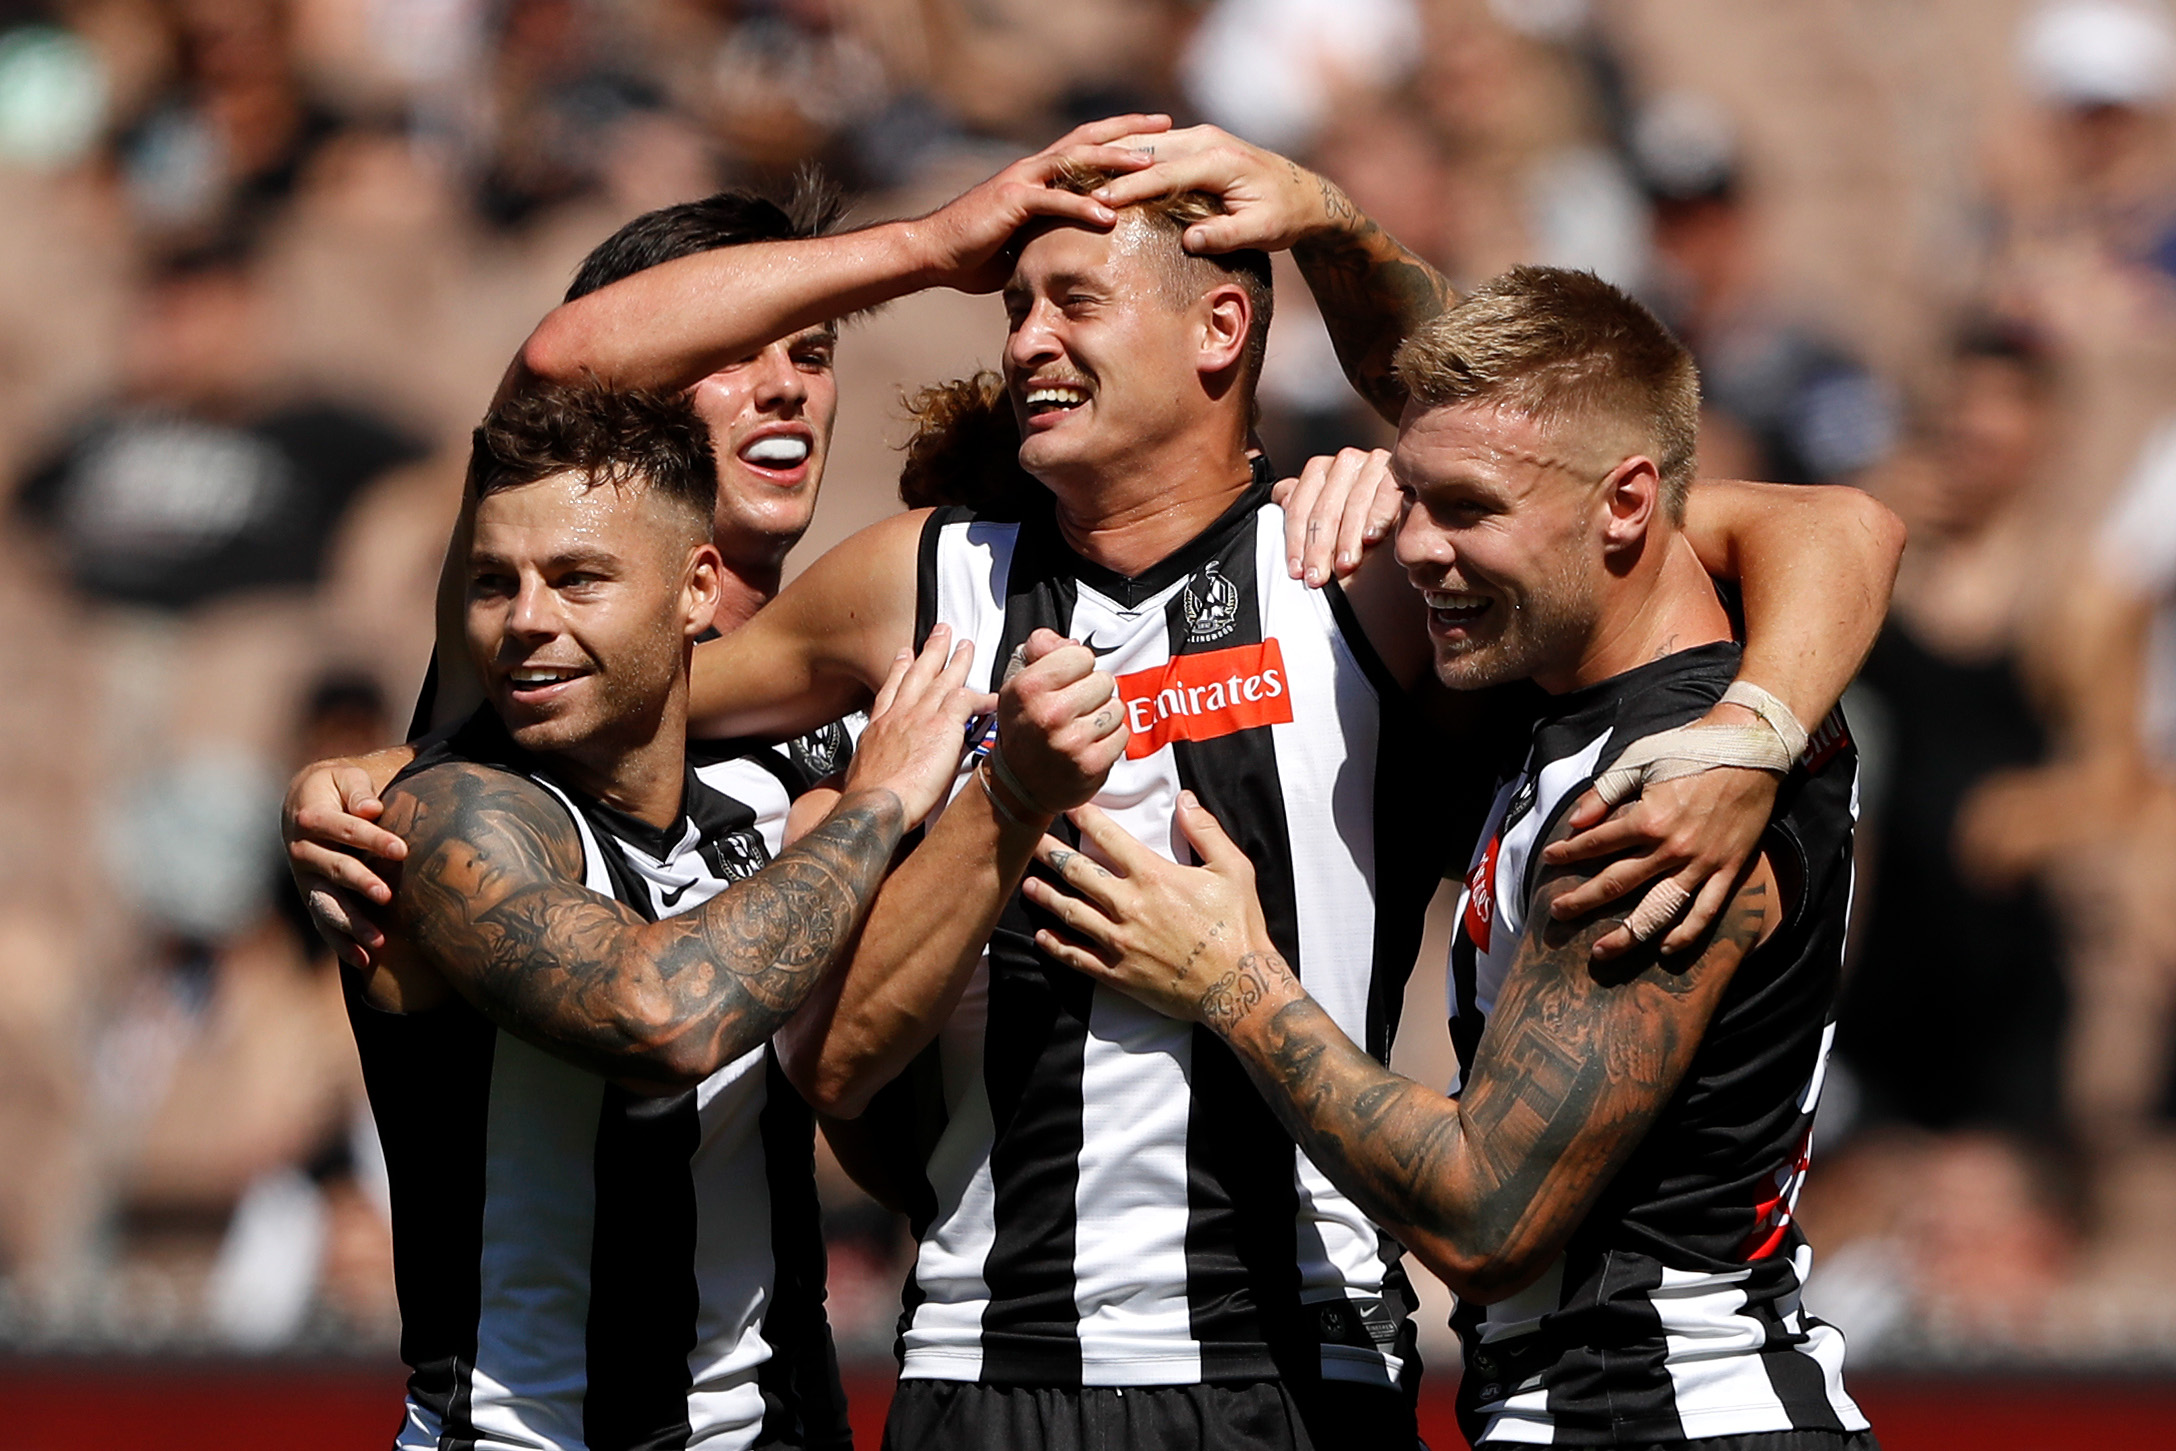 A group of Collingwood players gather around Nathan Krueger and pat him on the head